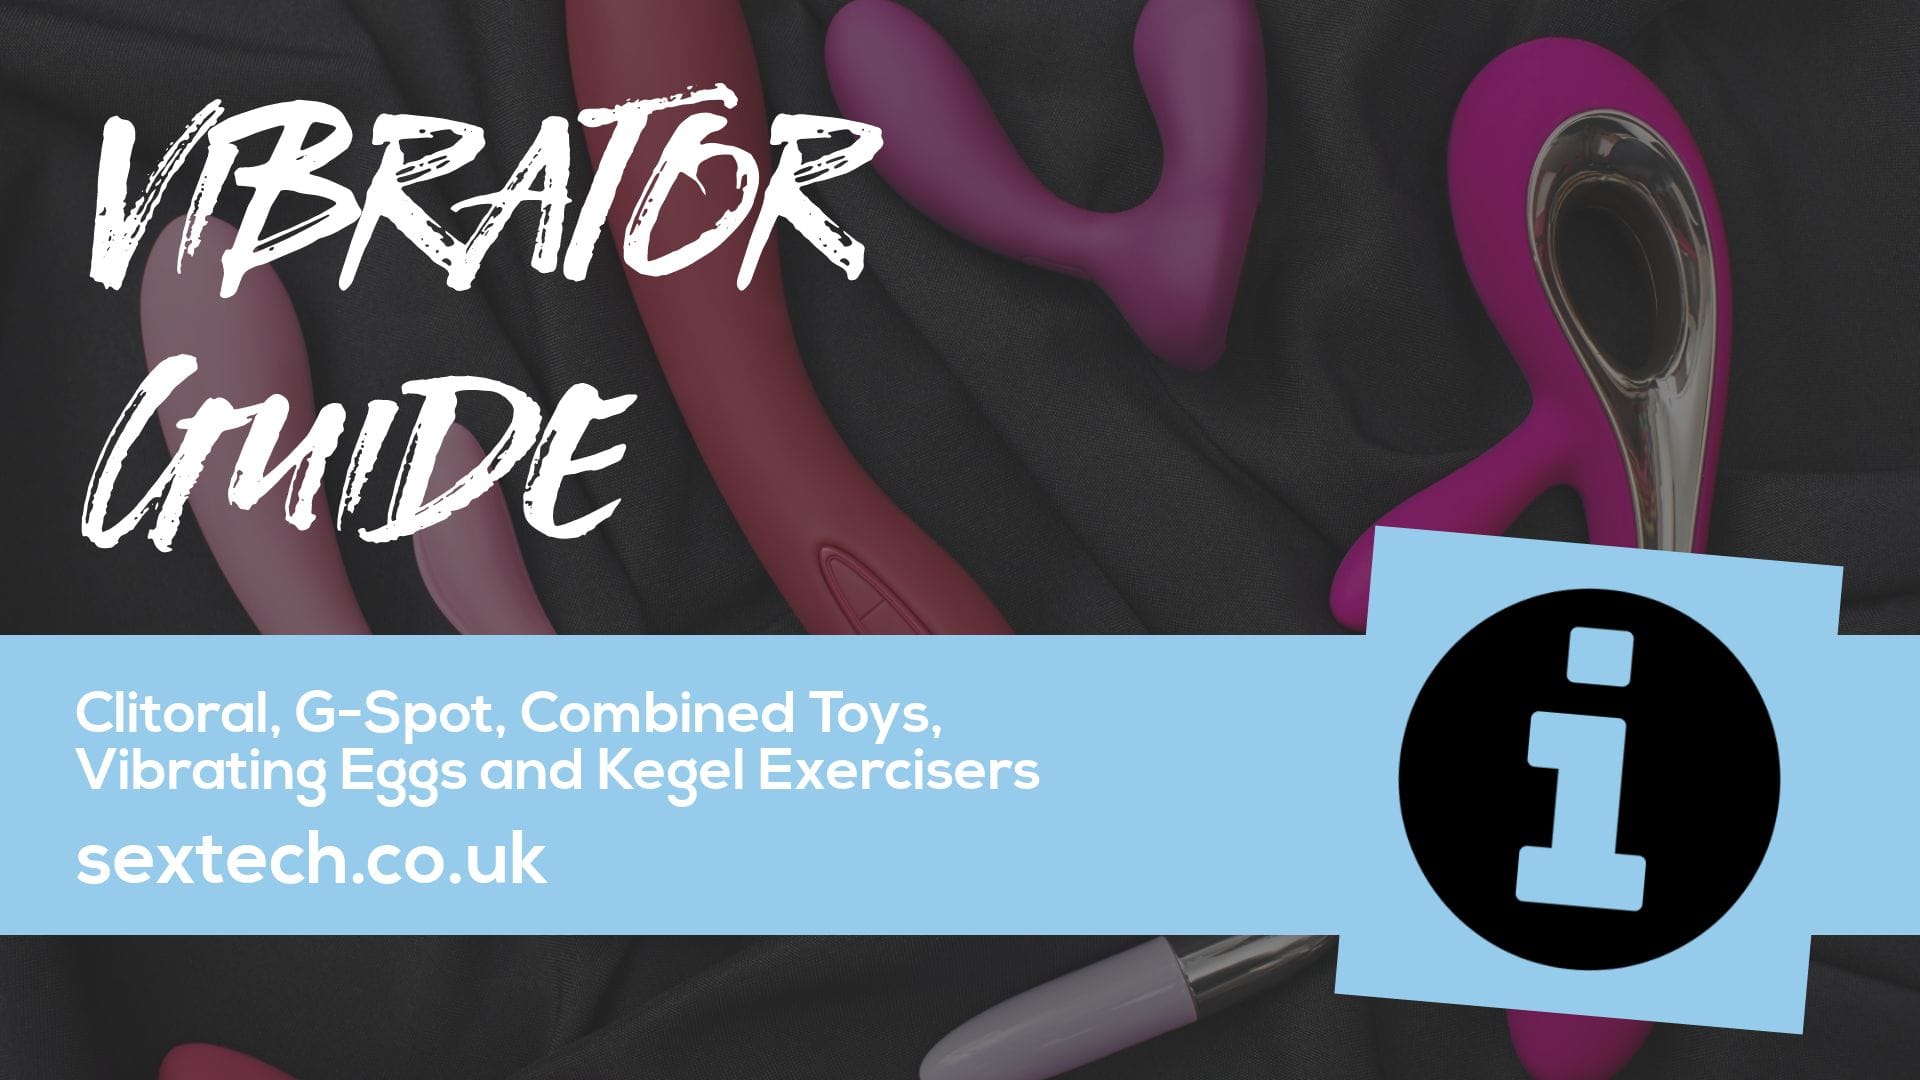 Vibrator Guide: Clitoral, G-Spot, Combined Toys, Vibrating Eggs and Kegel Exercisers